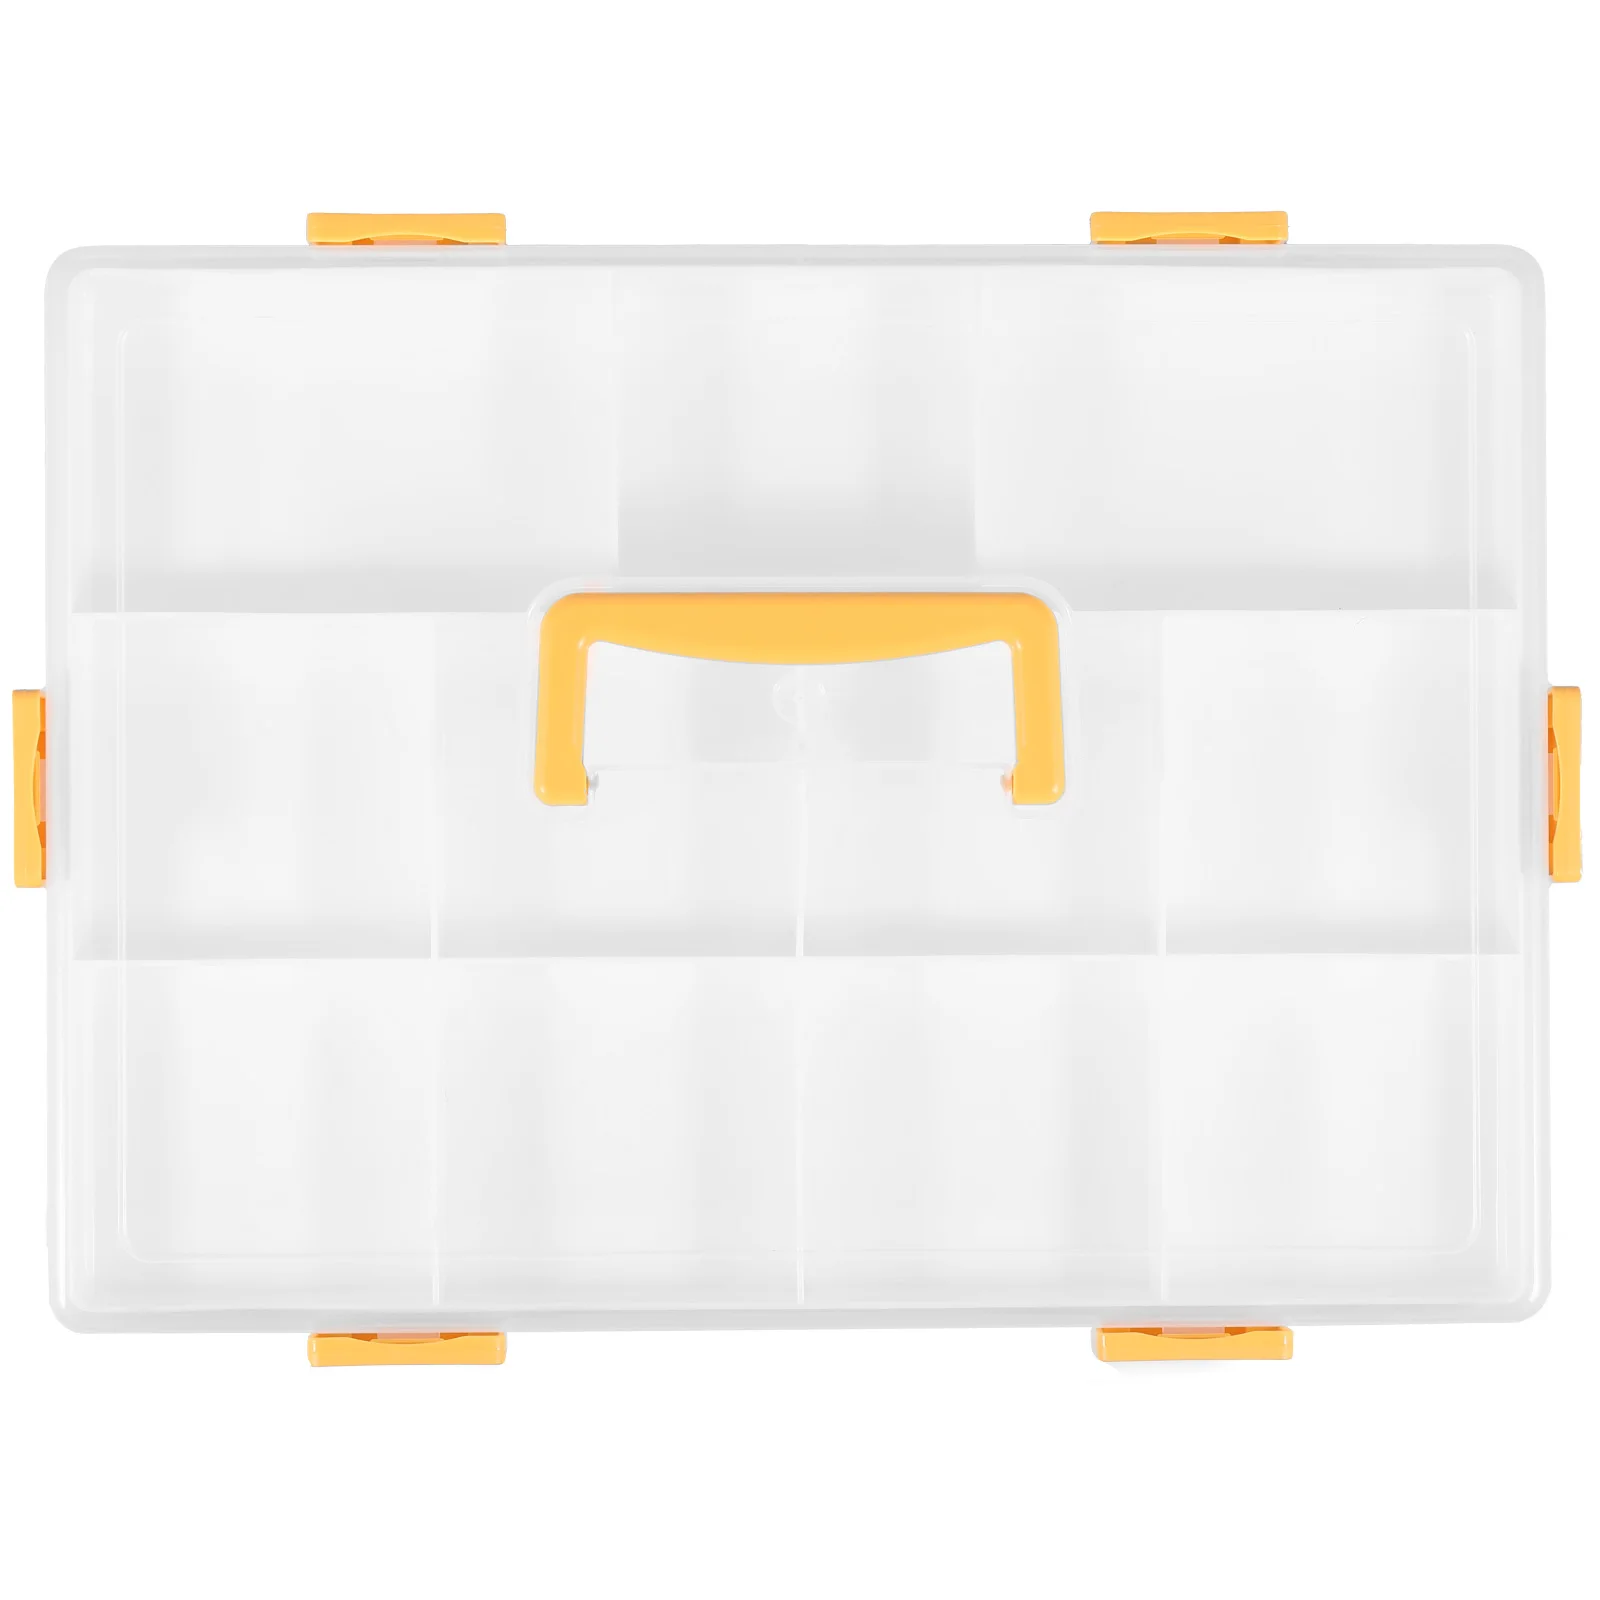 

Kid Building Block Storage Box Clear Plastic Storage Box with 2 Removable Trays Stackable Craft Organizers with Lids Portable